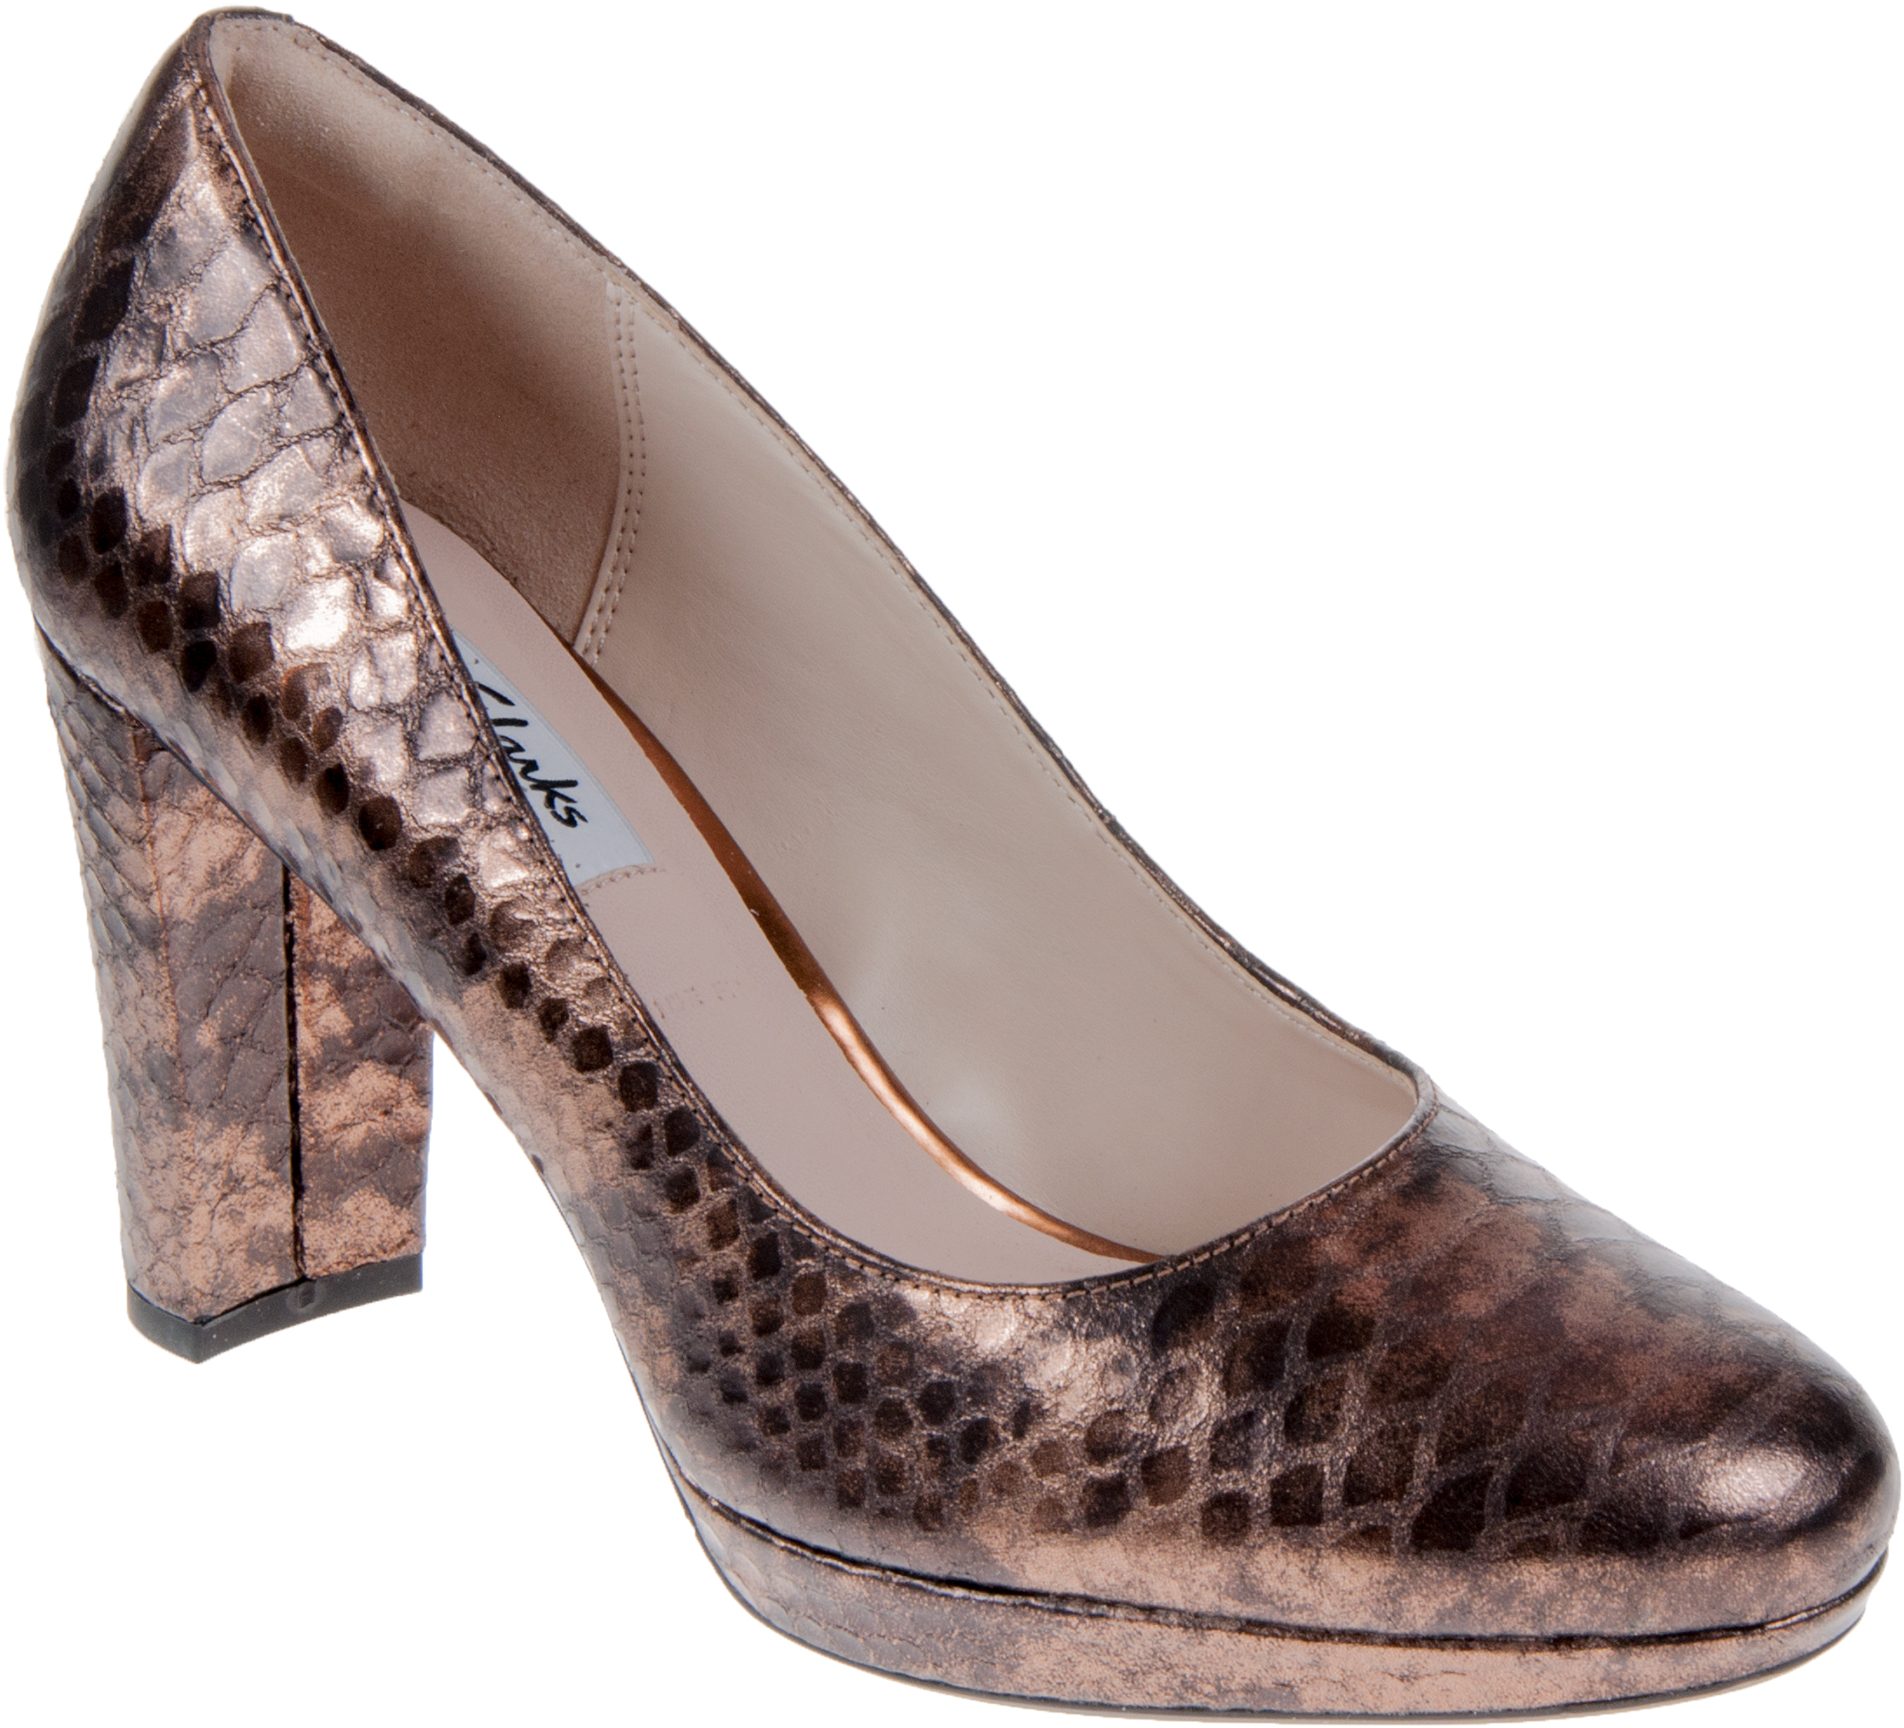 Clarks Kendra Sienna Bronze 26118846 - Shoes - Shoes